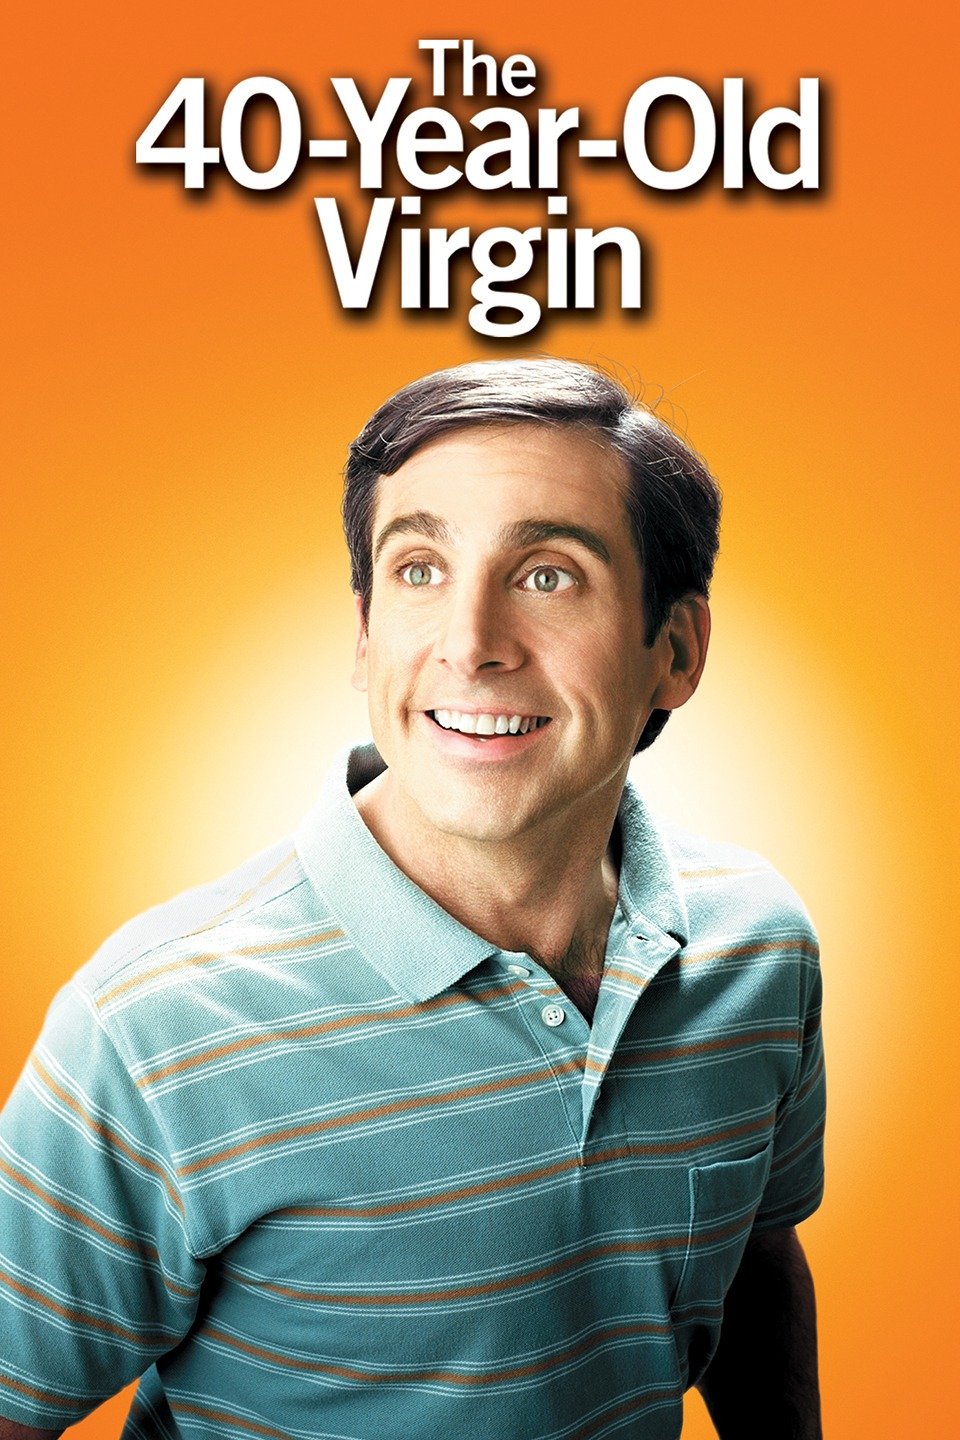 16yar Sex - The 40-Year-Old Virgin - Rotten Tomatoes